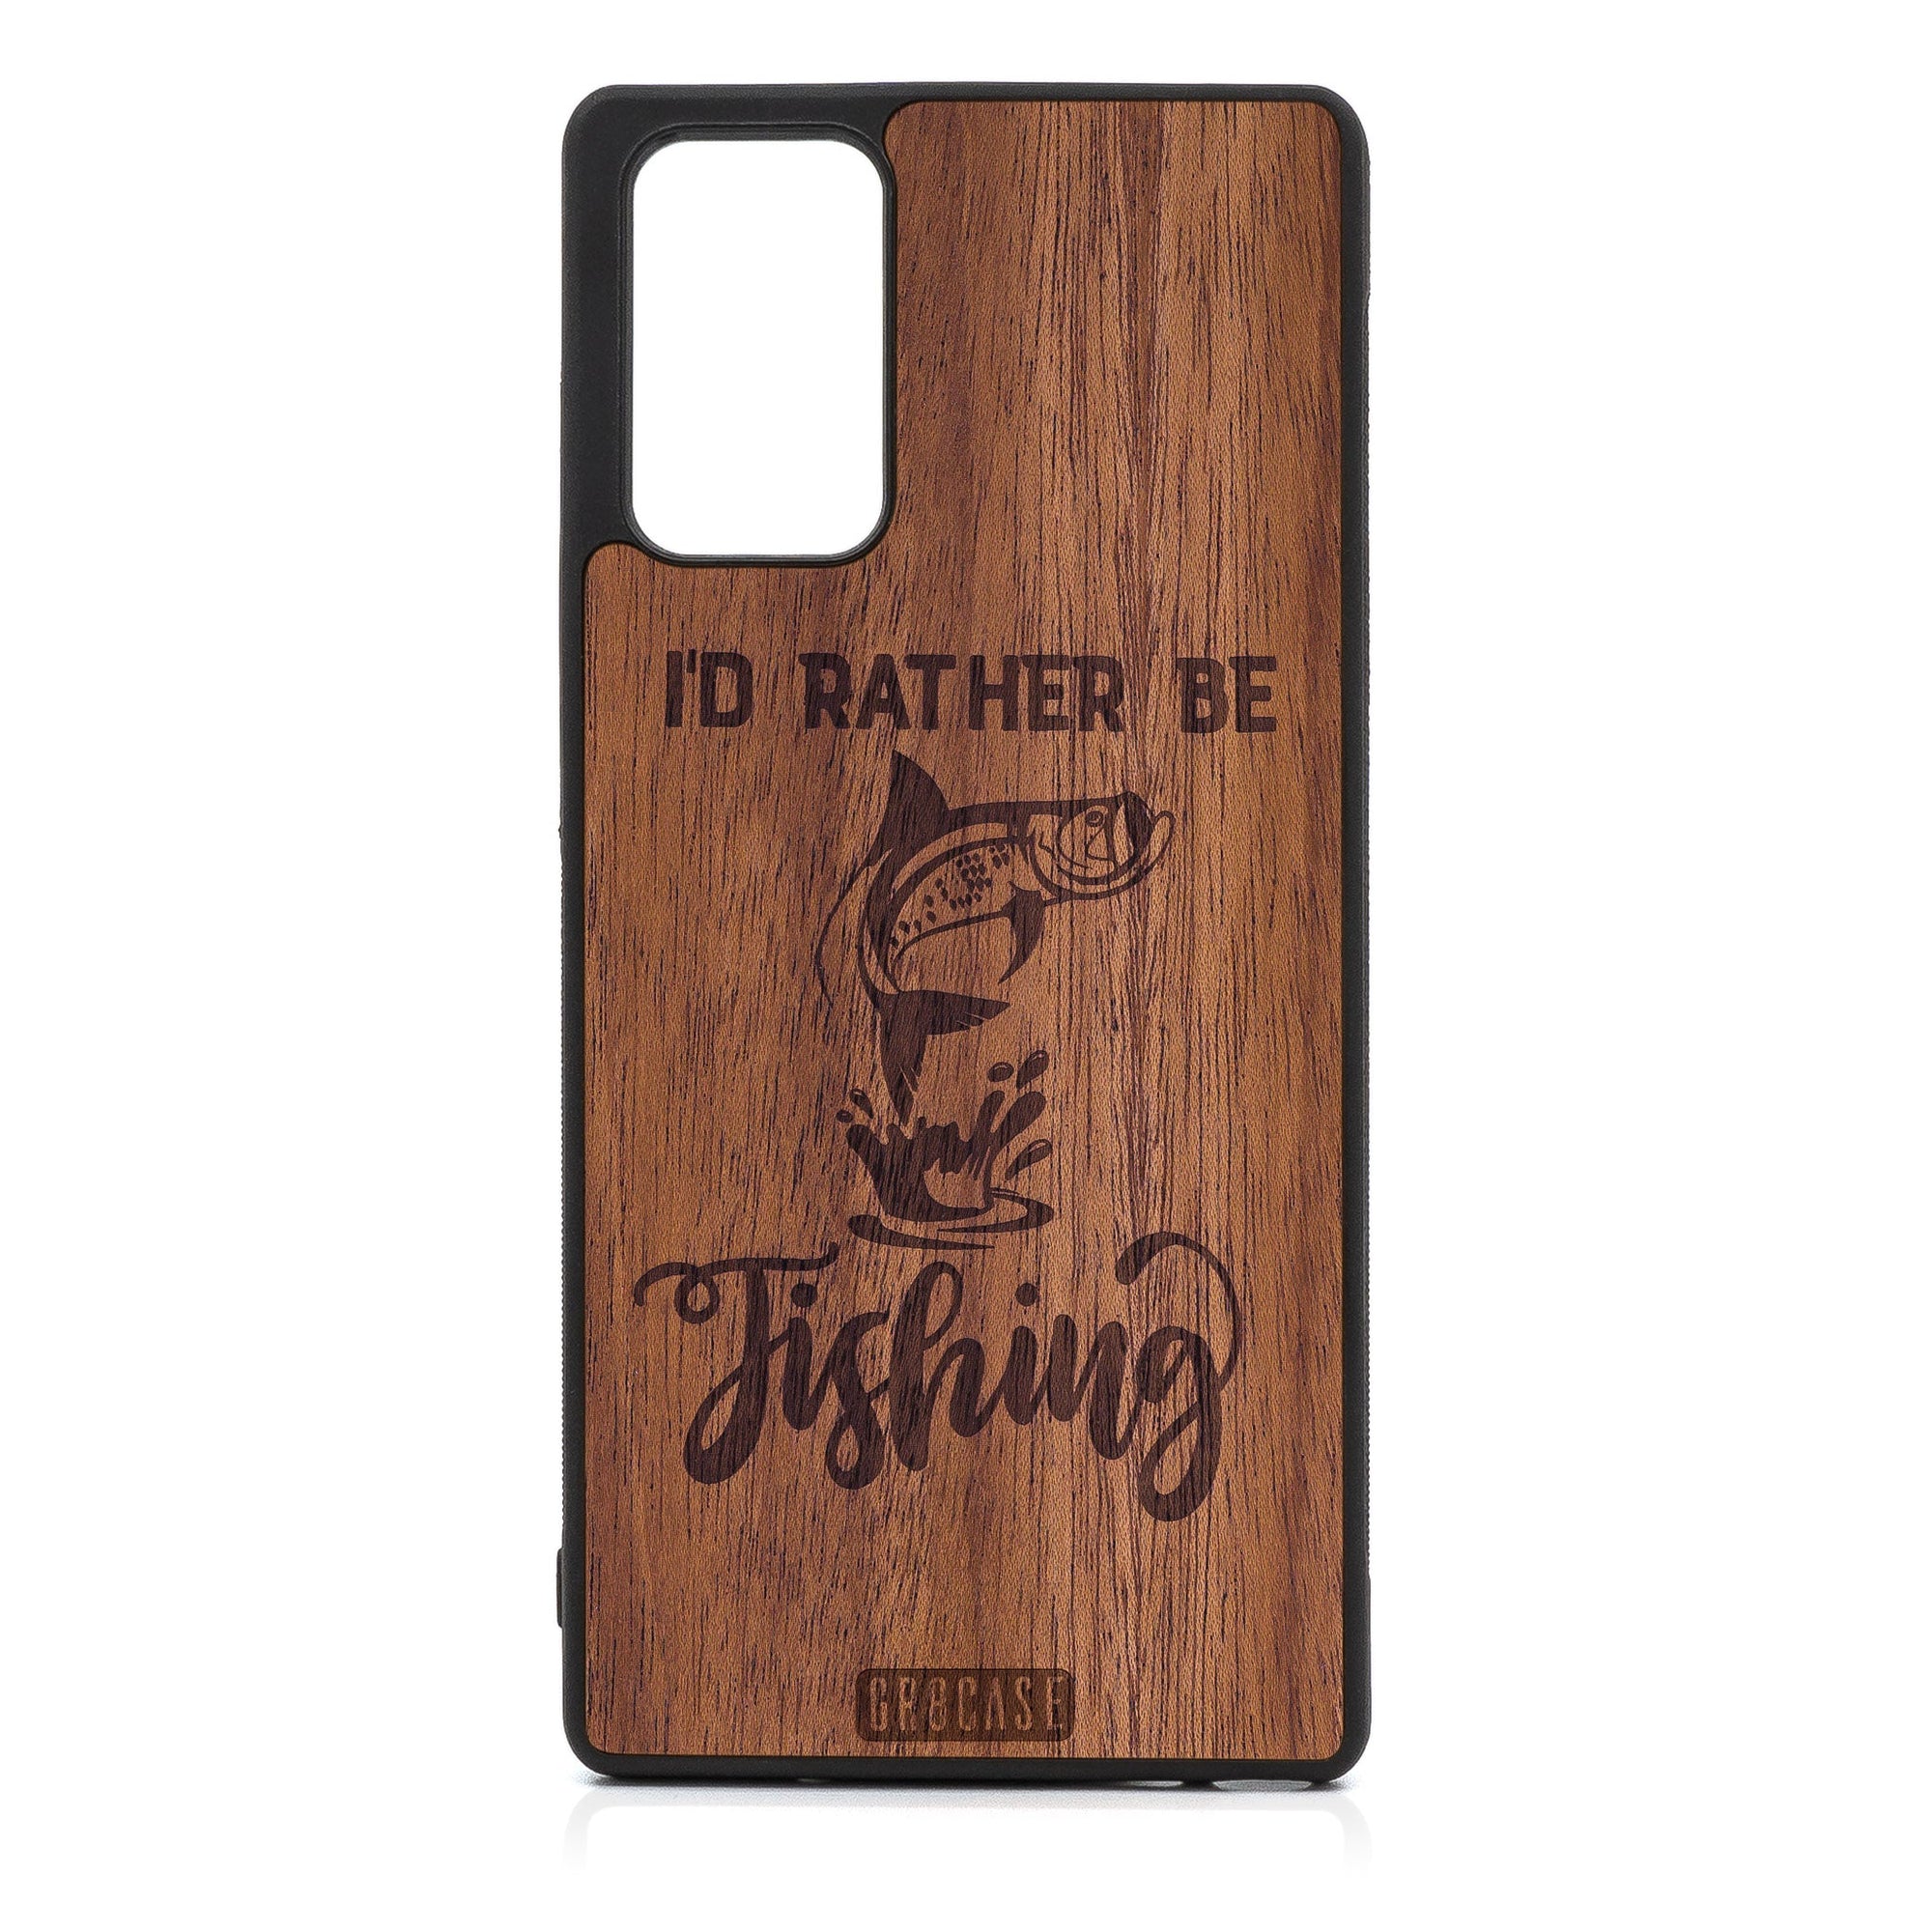 I'D Rather Be Fishing Design Wood Case For Samsung Galaxy A52 5G